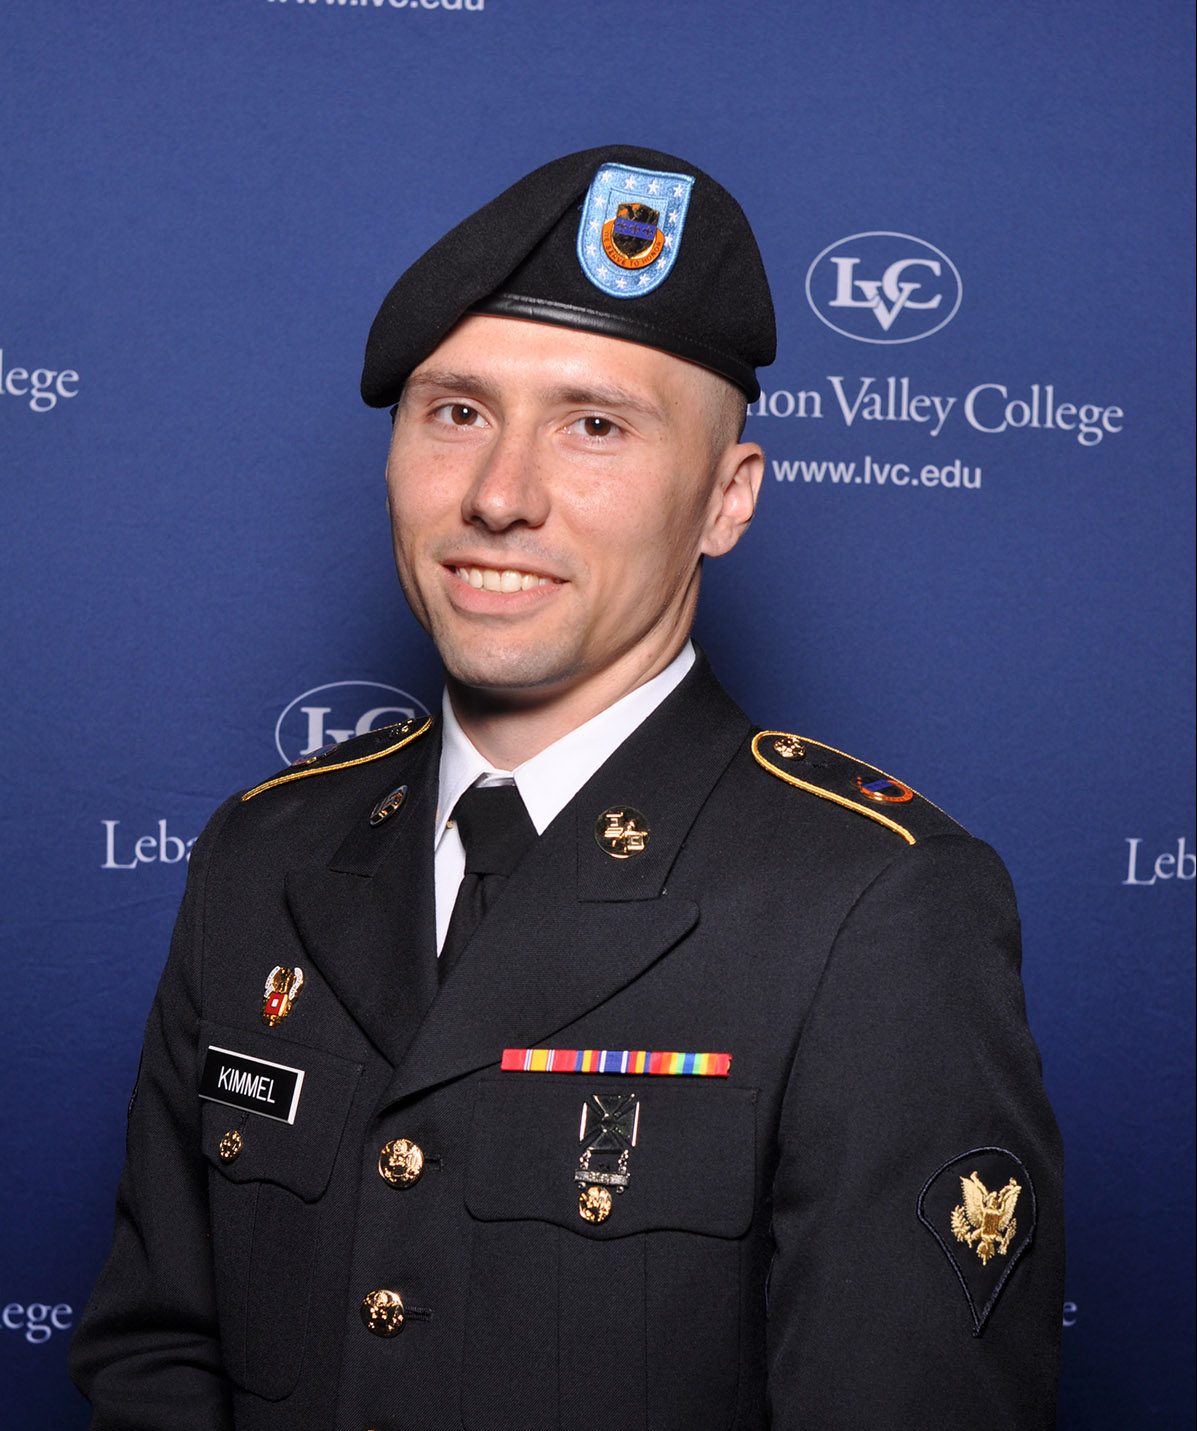 Military graduate of LVC in full uniform standing in front of LVC's logo and name on a blue wall